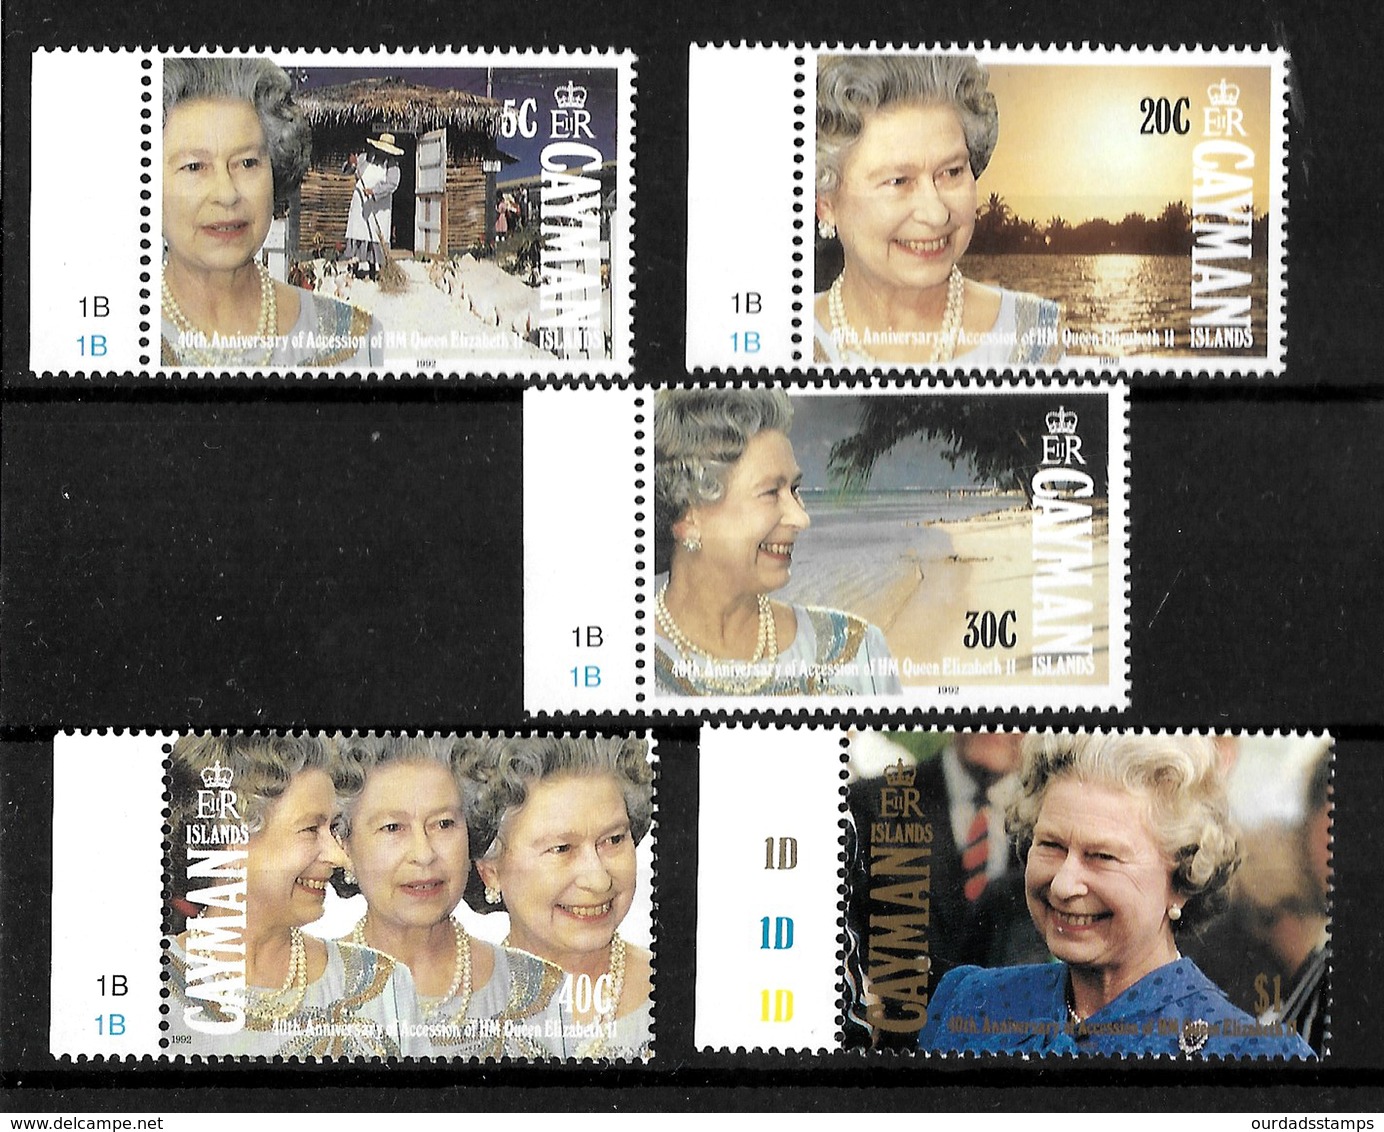 Cayman Islands 1992 QEII 40th Anniversary Of Accession, Complete Set MNH Marginals  (7179) - Cayman Islands